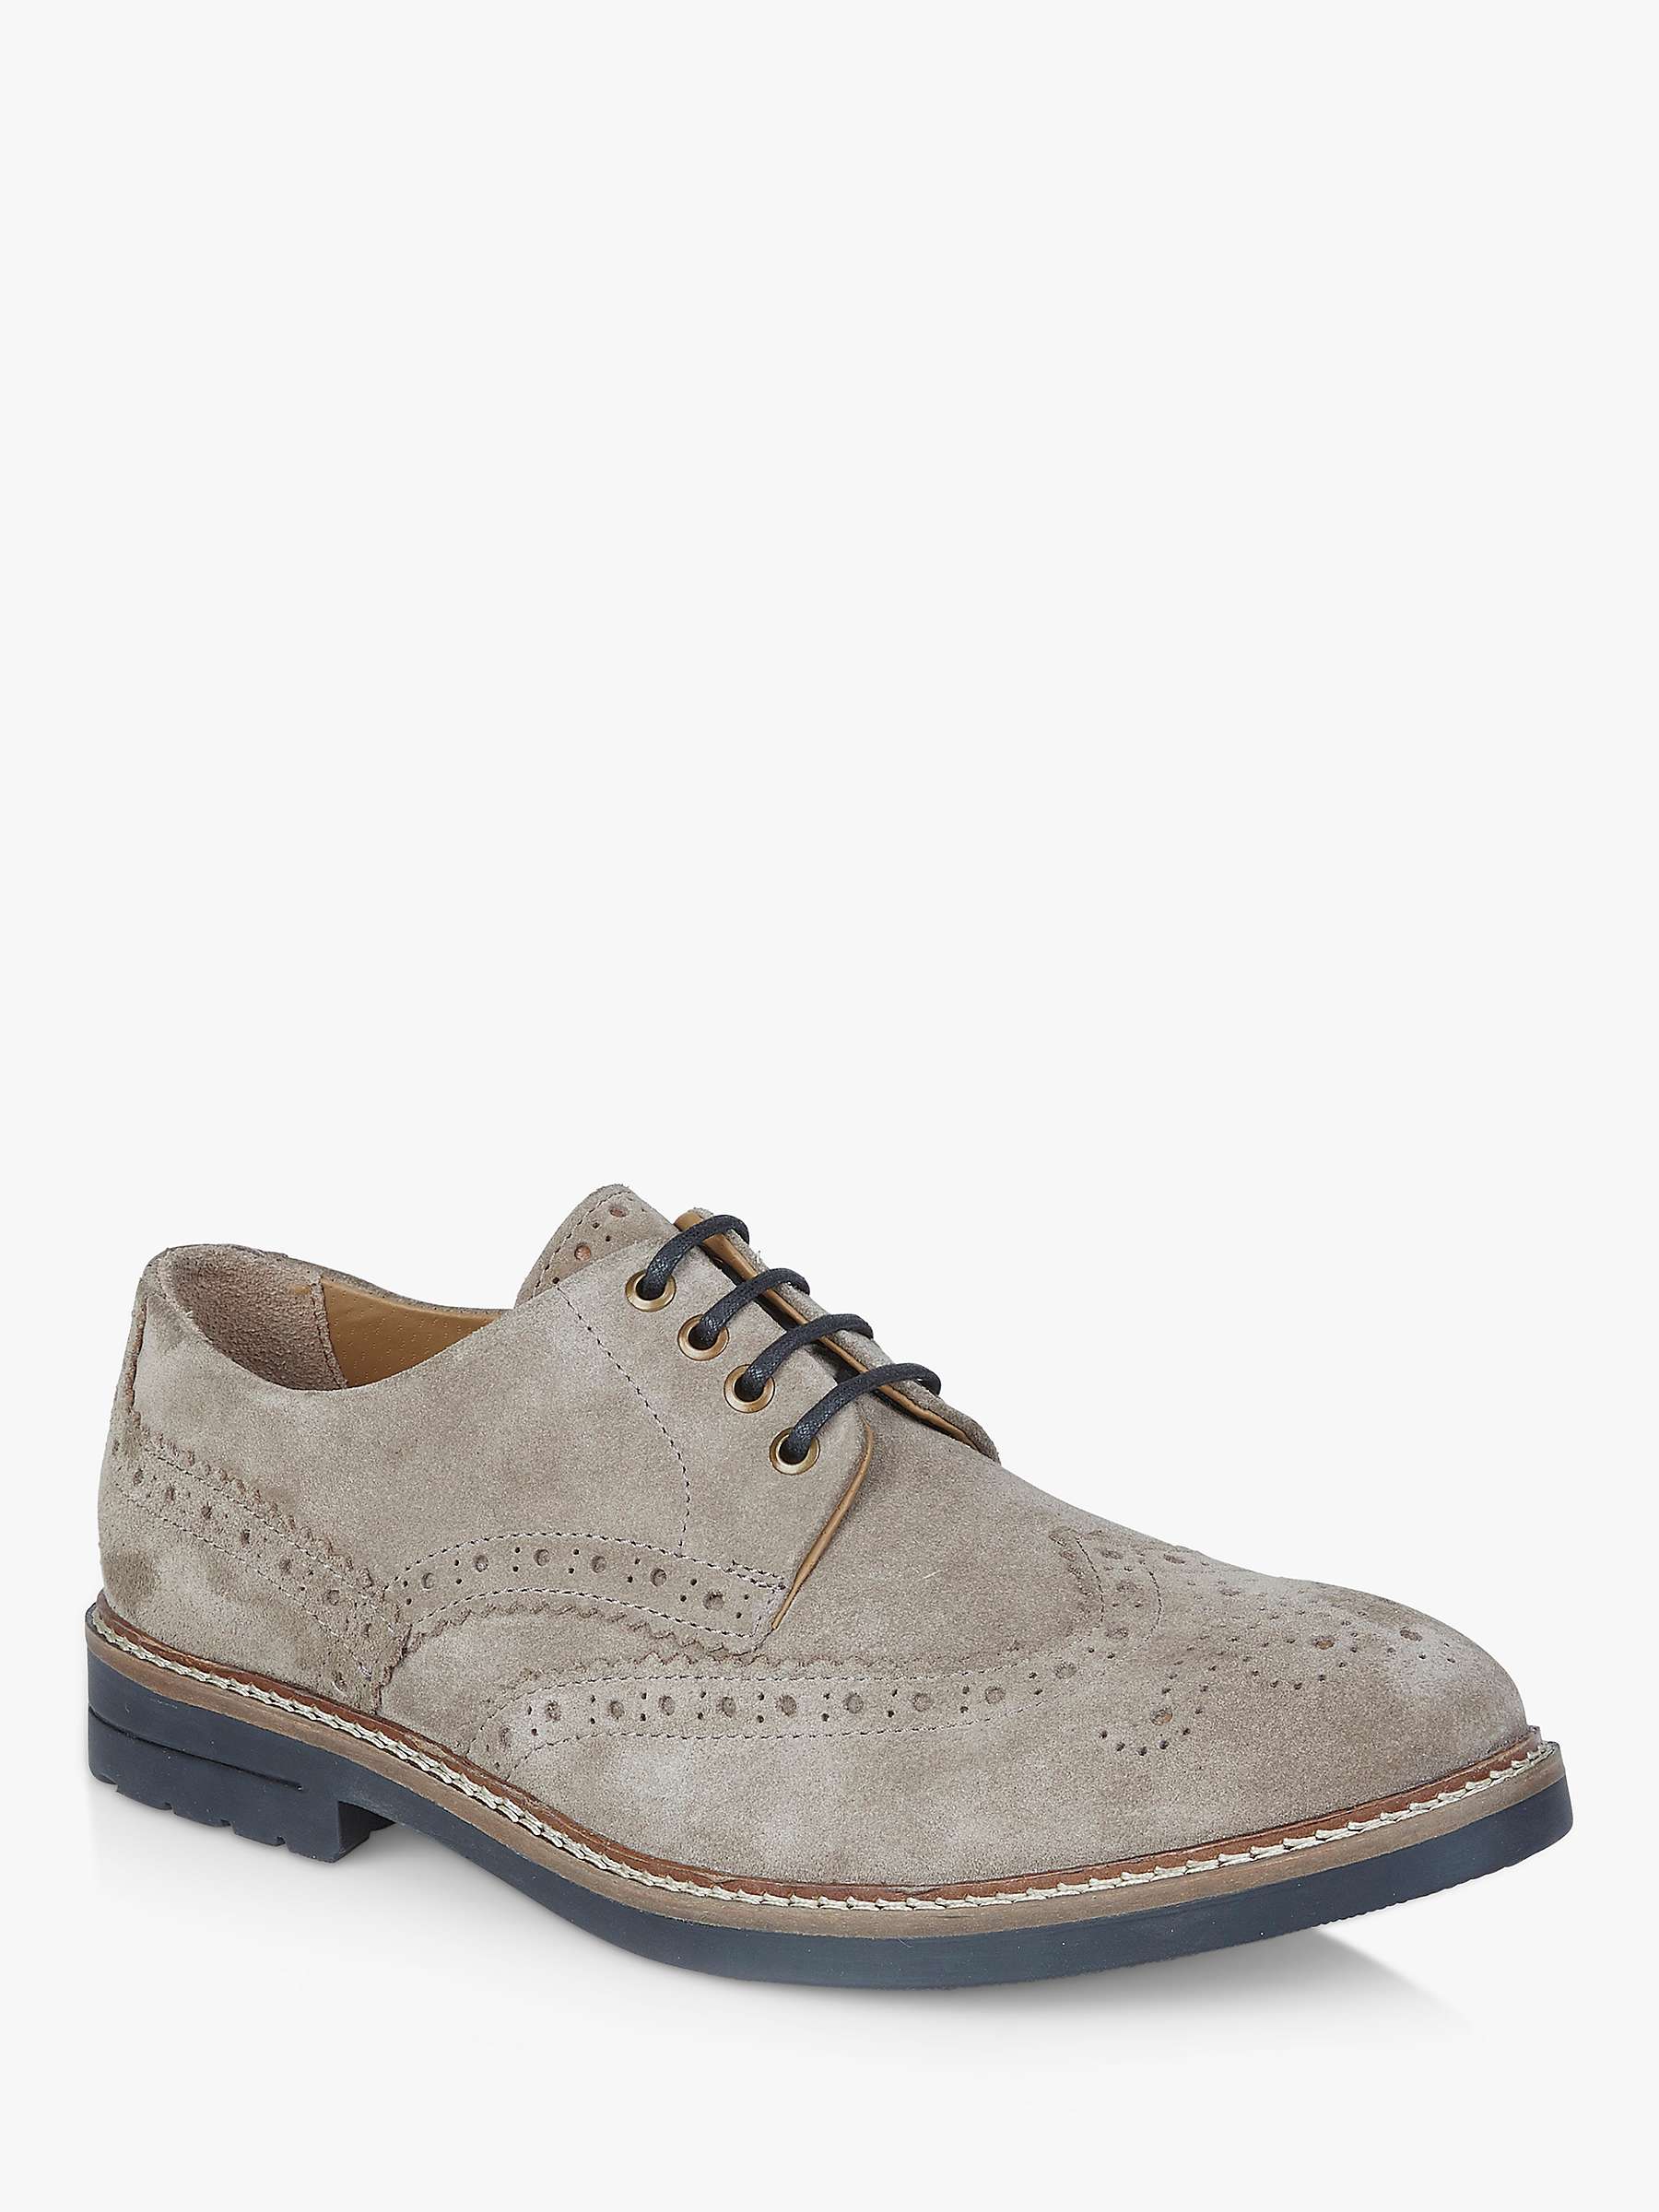 Buy Silver Street London Tooting Suede Lace Up Brogue Shoes Online at johnlewis.com